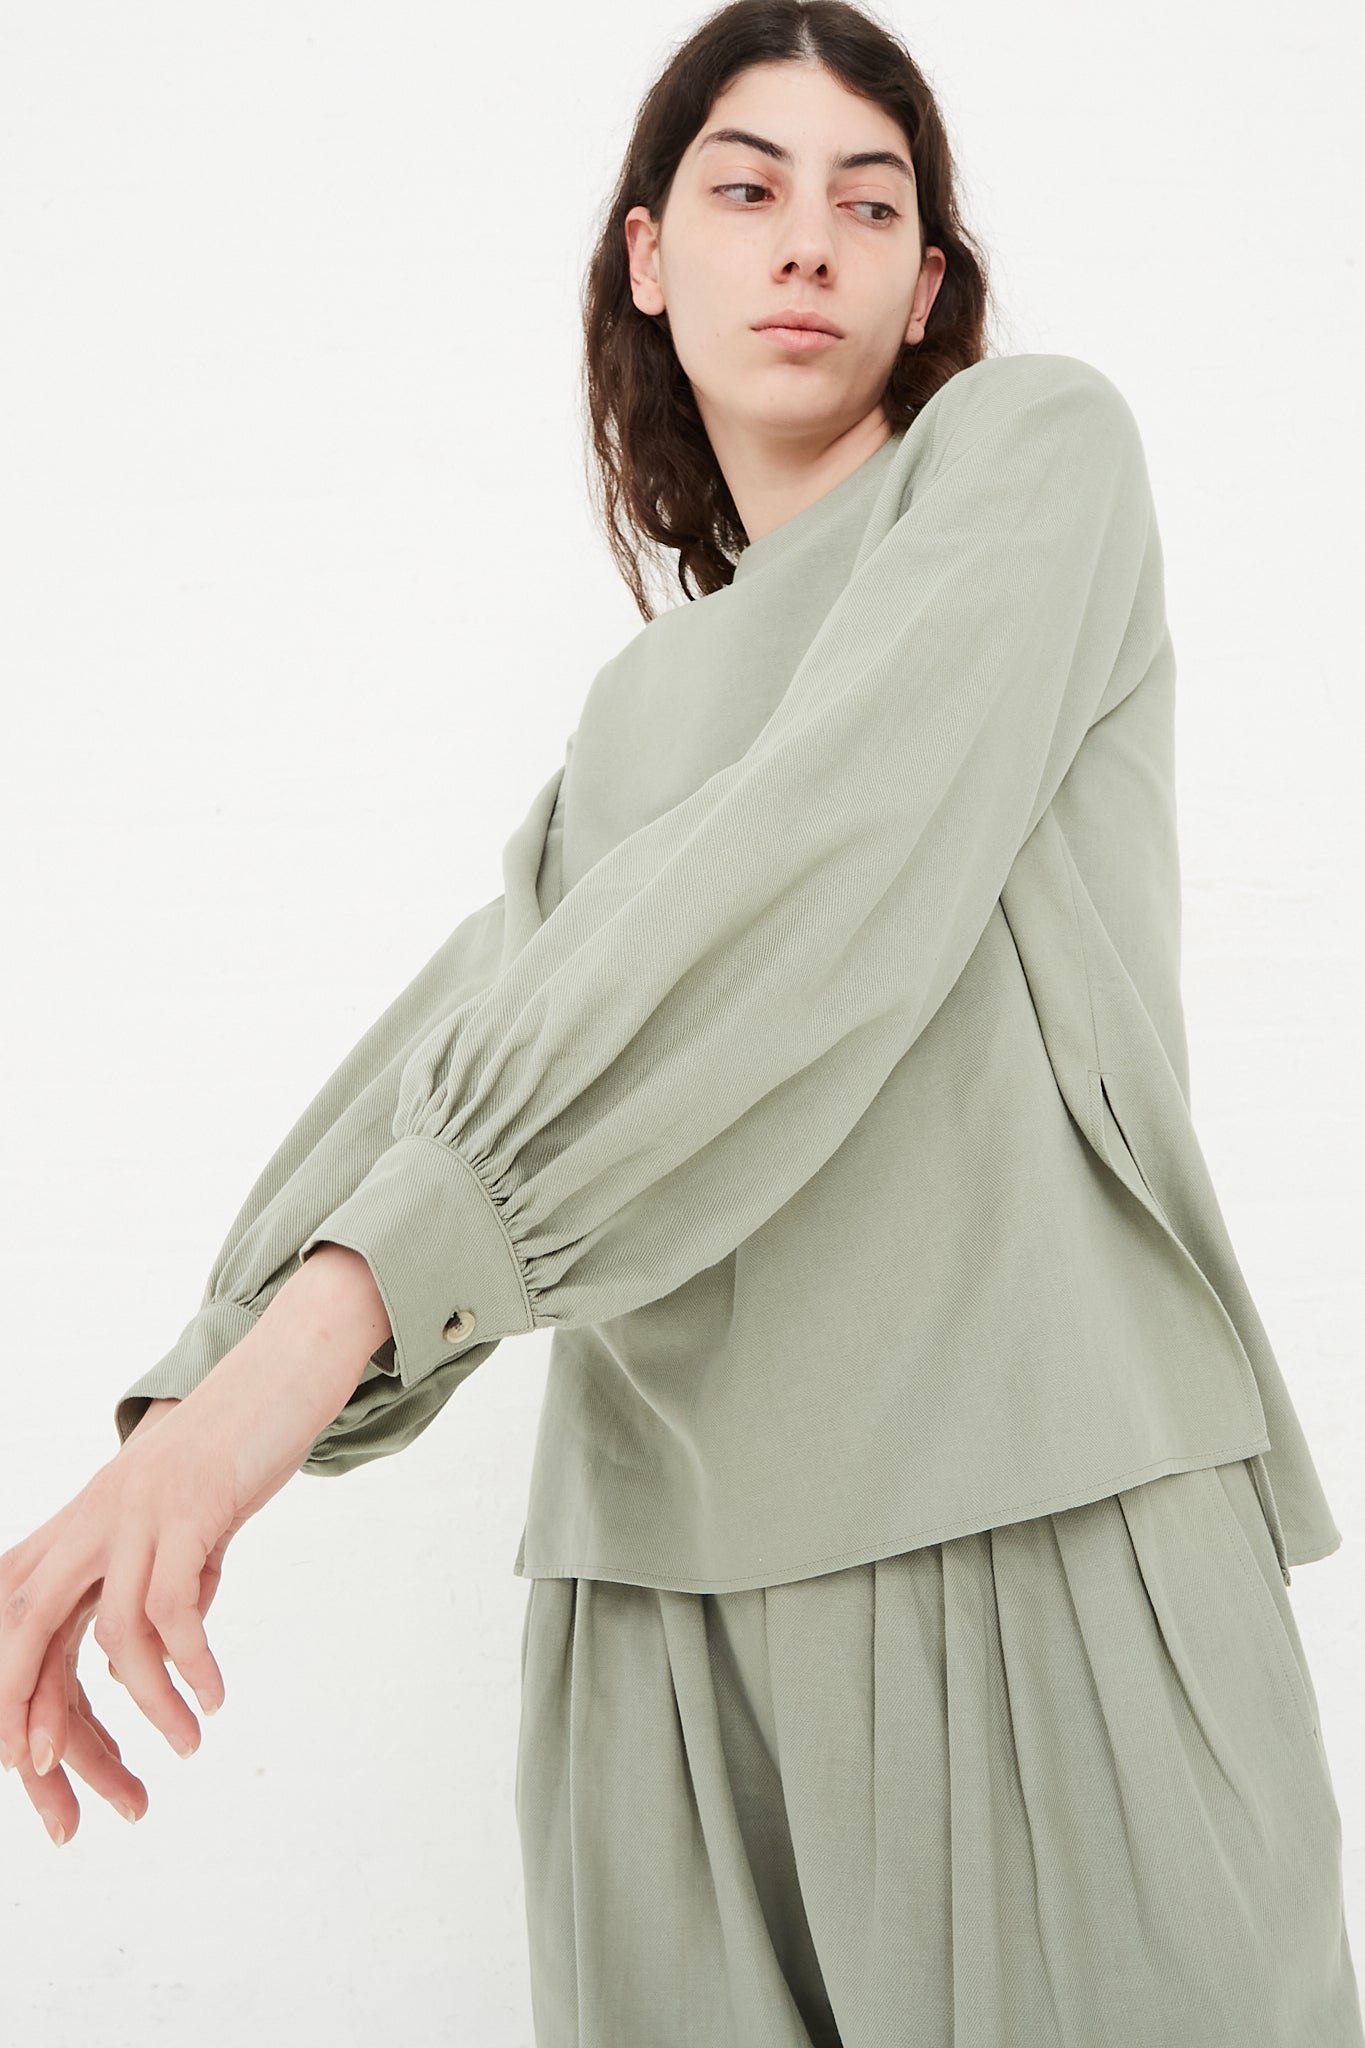 Cotton Twill Puff Sleeve Blouse in Agave by Black Crane for Oroboro Front